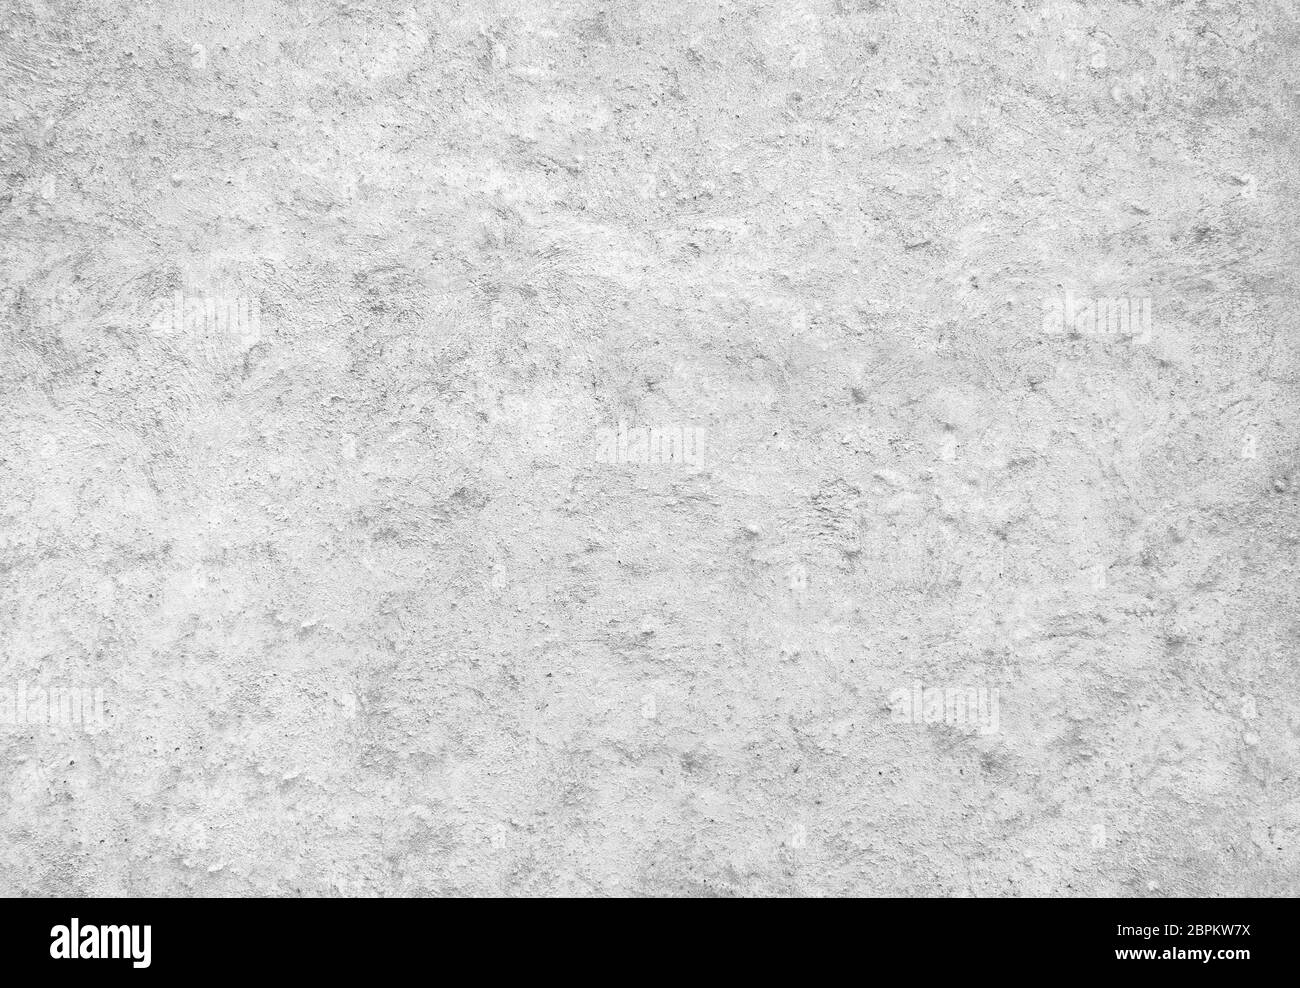 White rough concrete wall. It can be used as textures and backgrounds ...